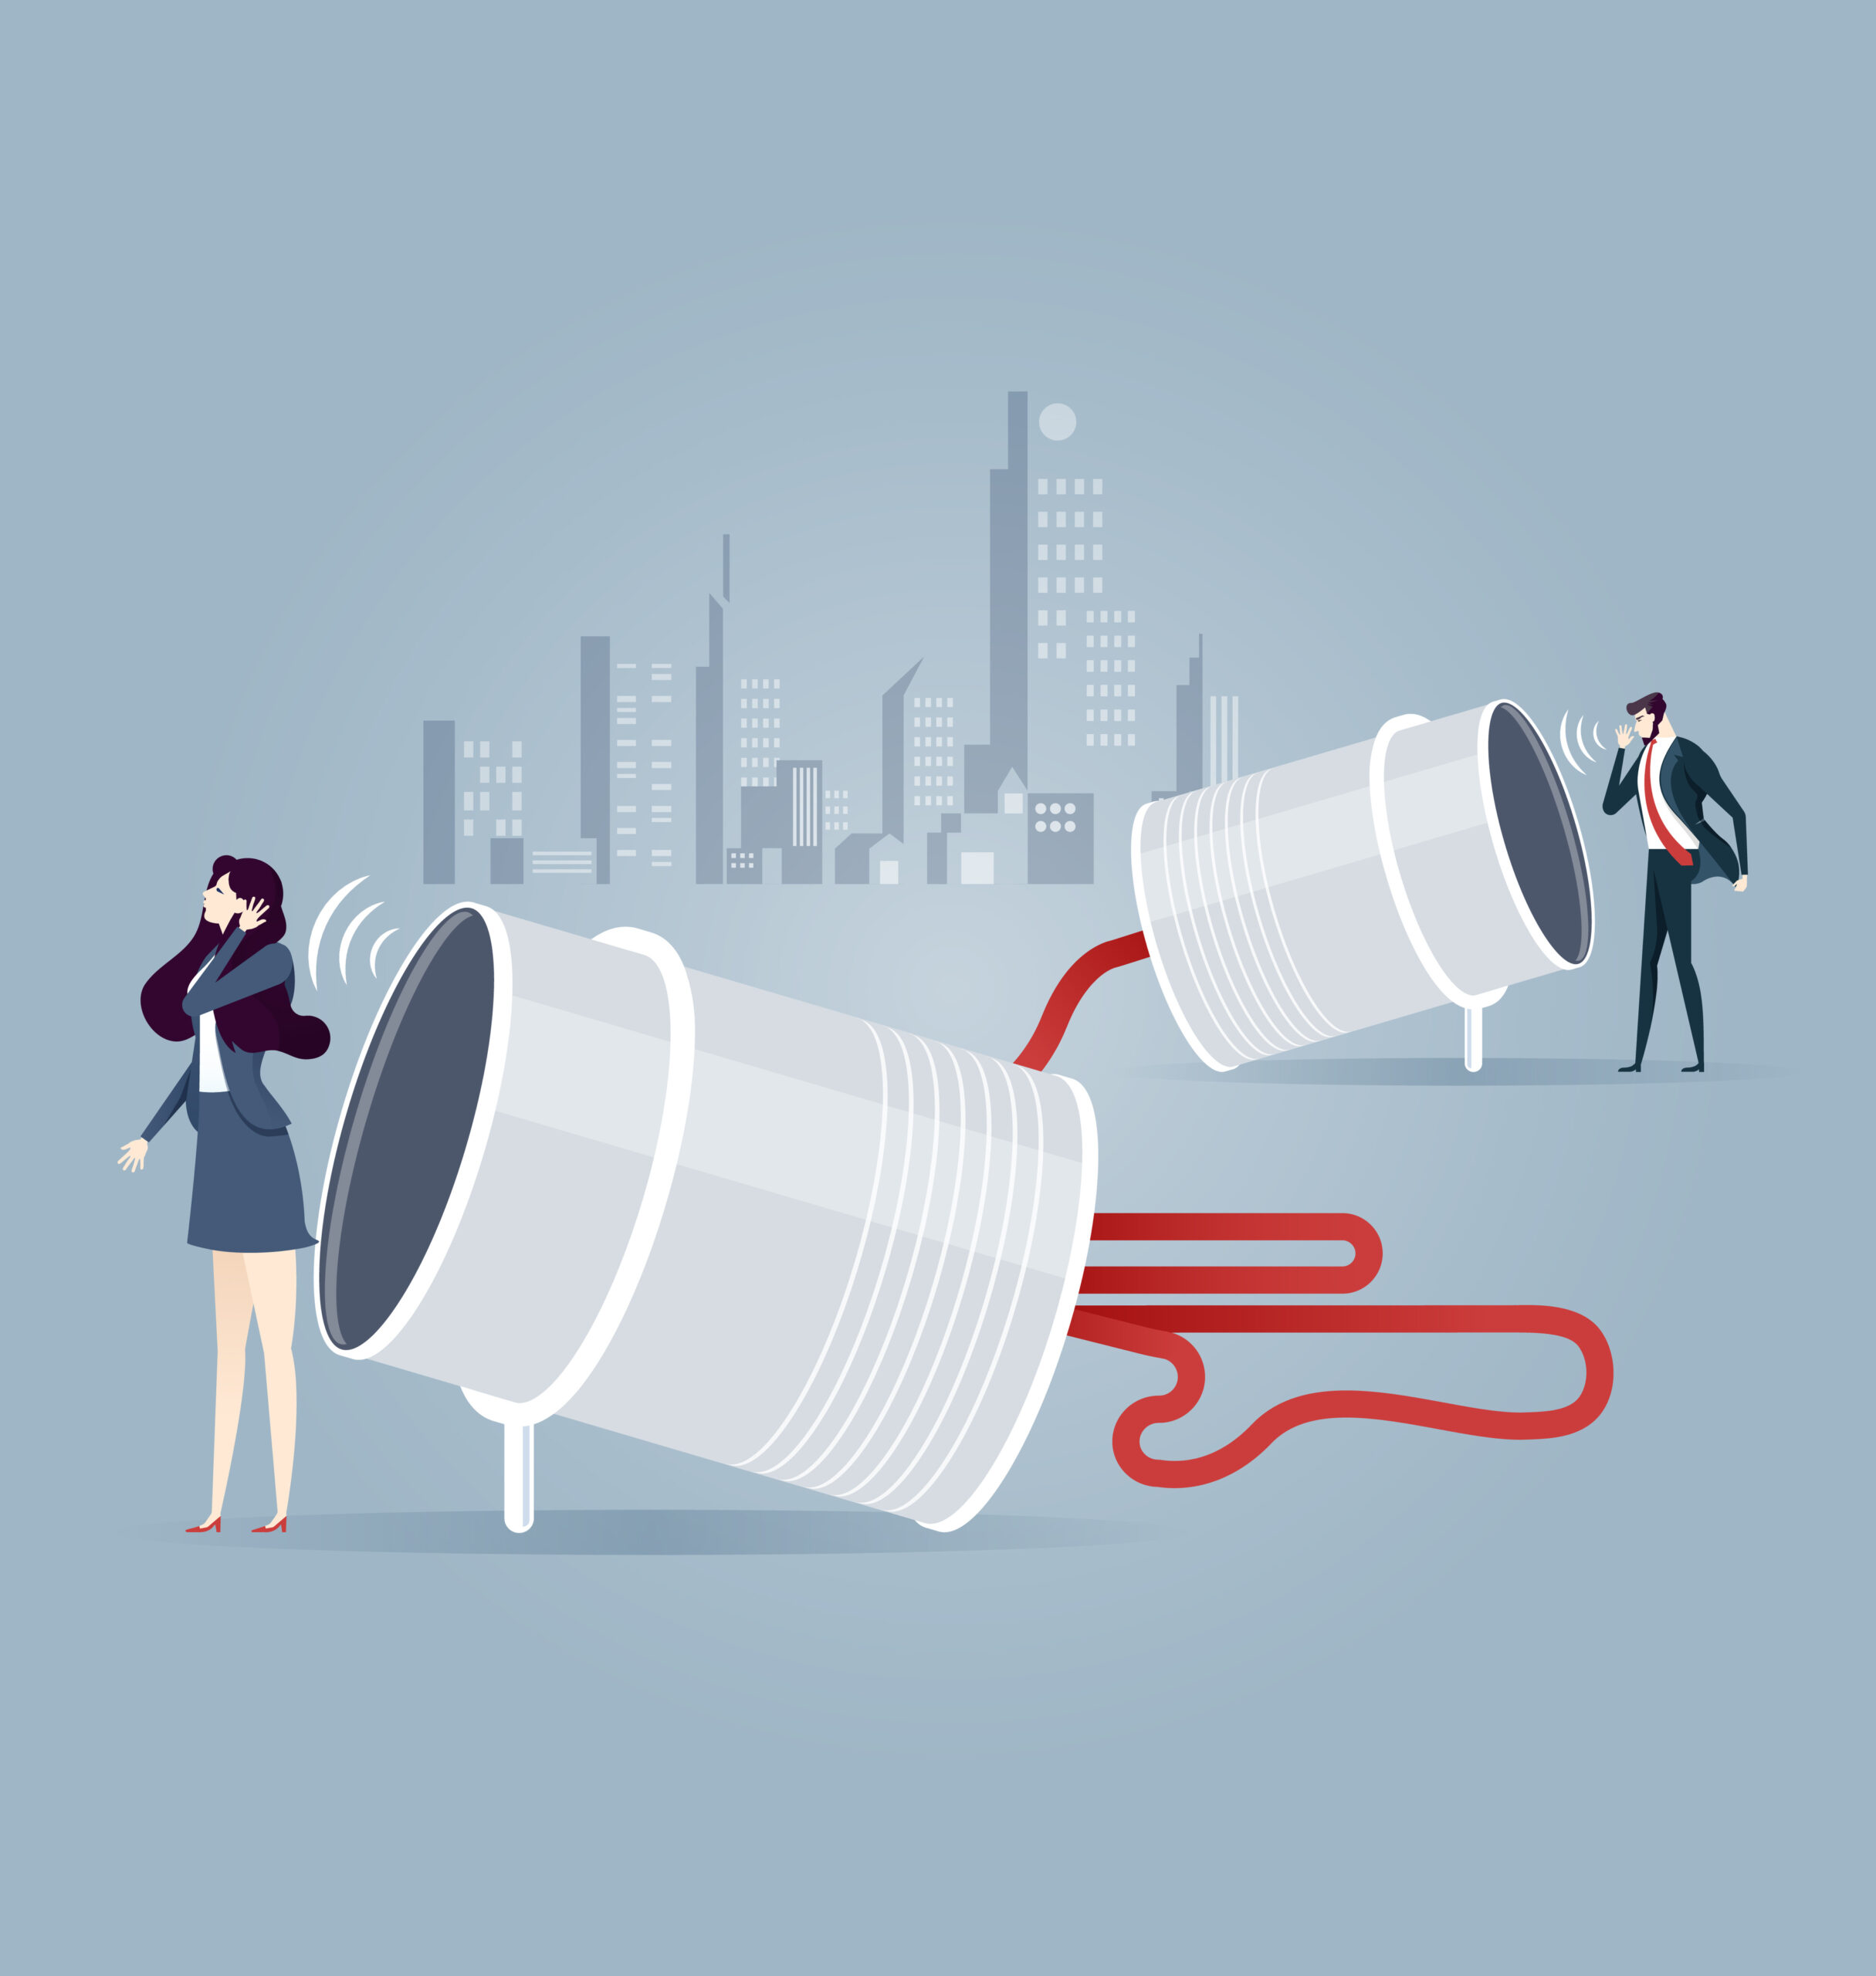 vector image of a business woman and business man communicating between two large cans tied by a string